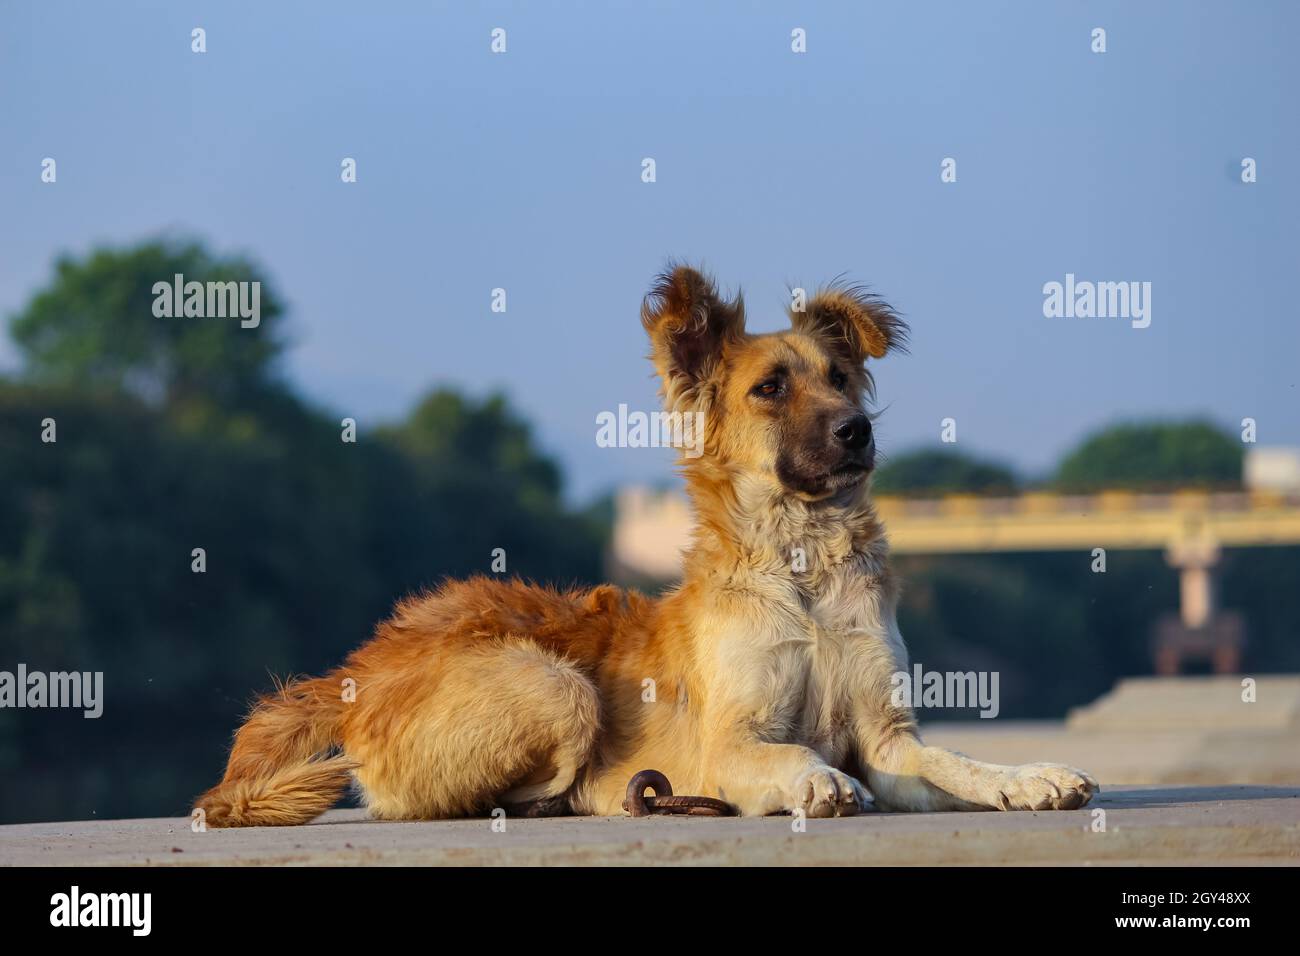 the beautiful Indian breed dog sitting the flor. Stock Photo